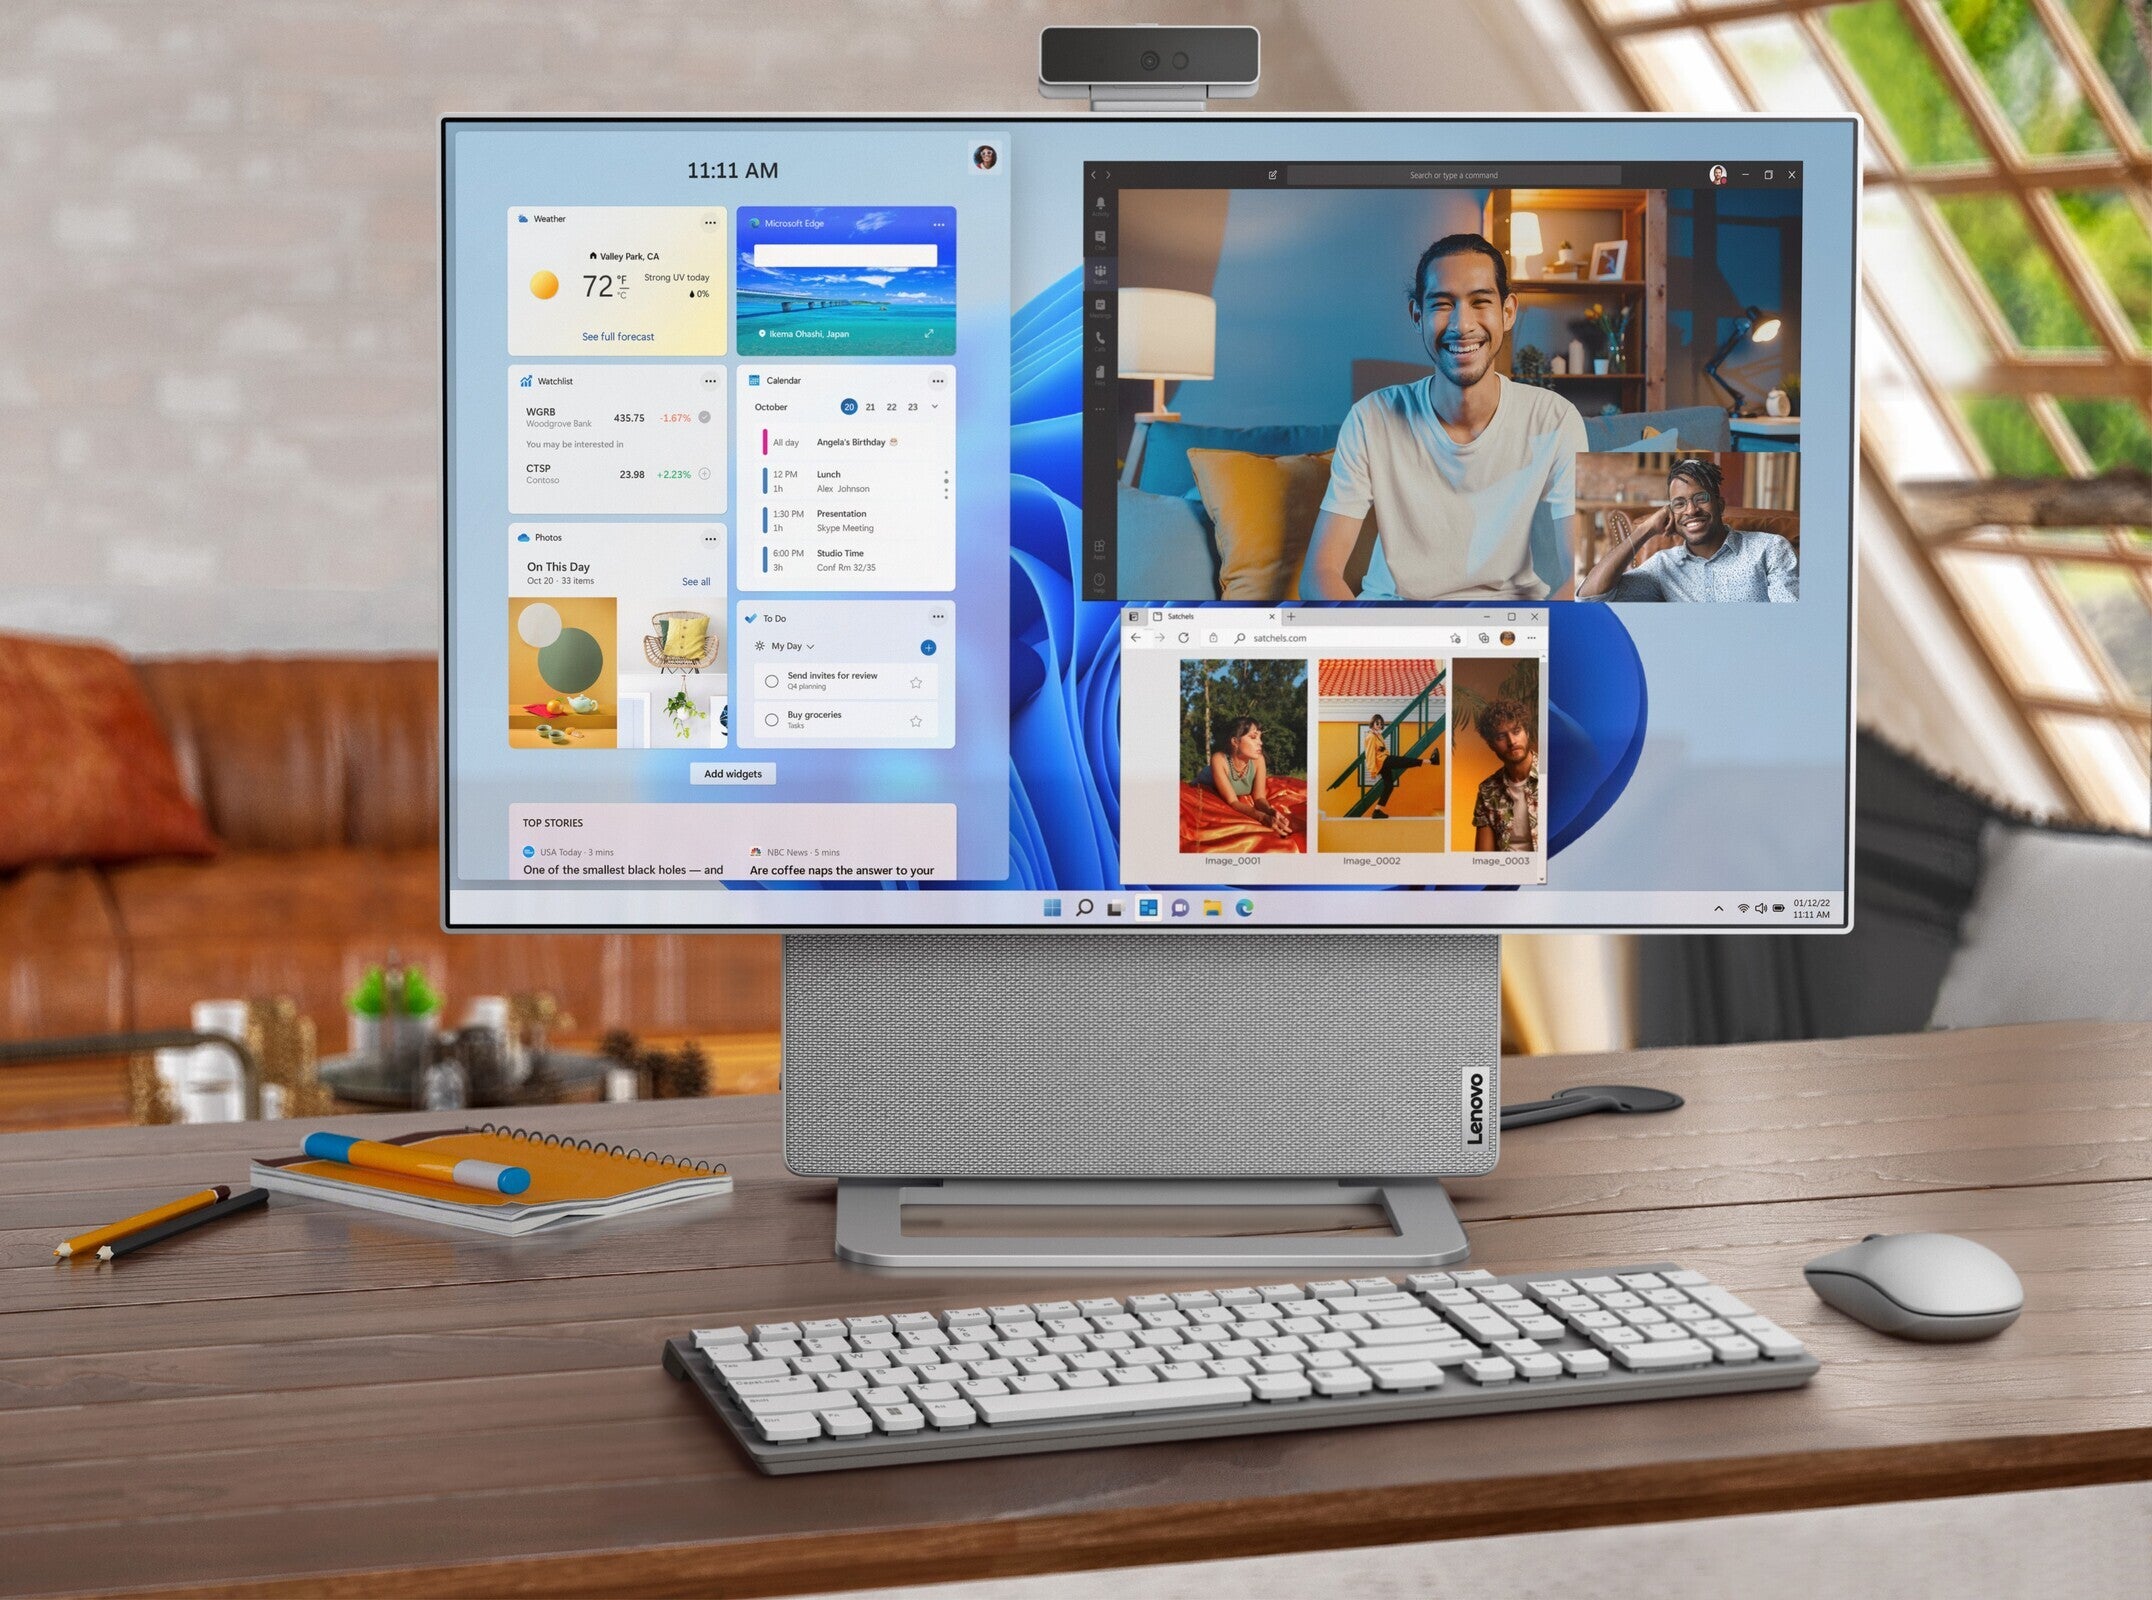 The Yoga AIO 7 comes with a 27 inch 4K screen with vibrant colors - This sleek 27&quot; all-in-one PC connects to your phone and has a rotating screen